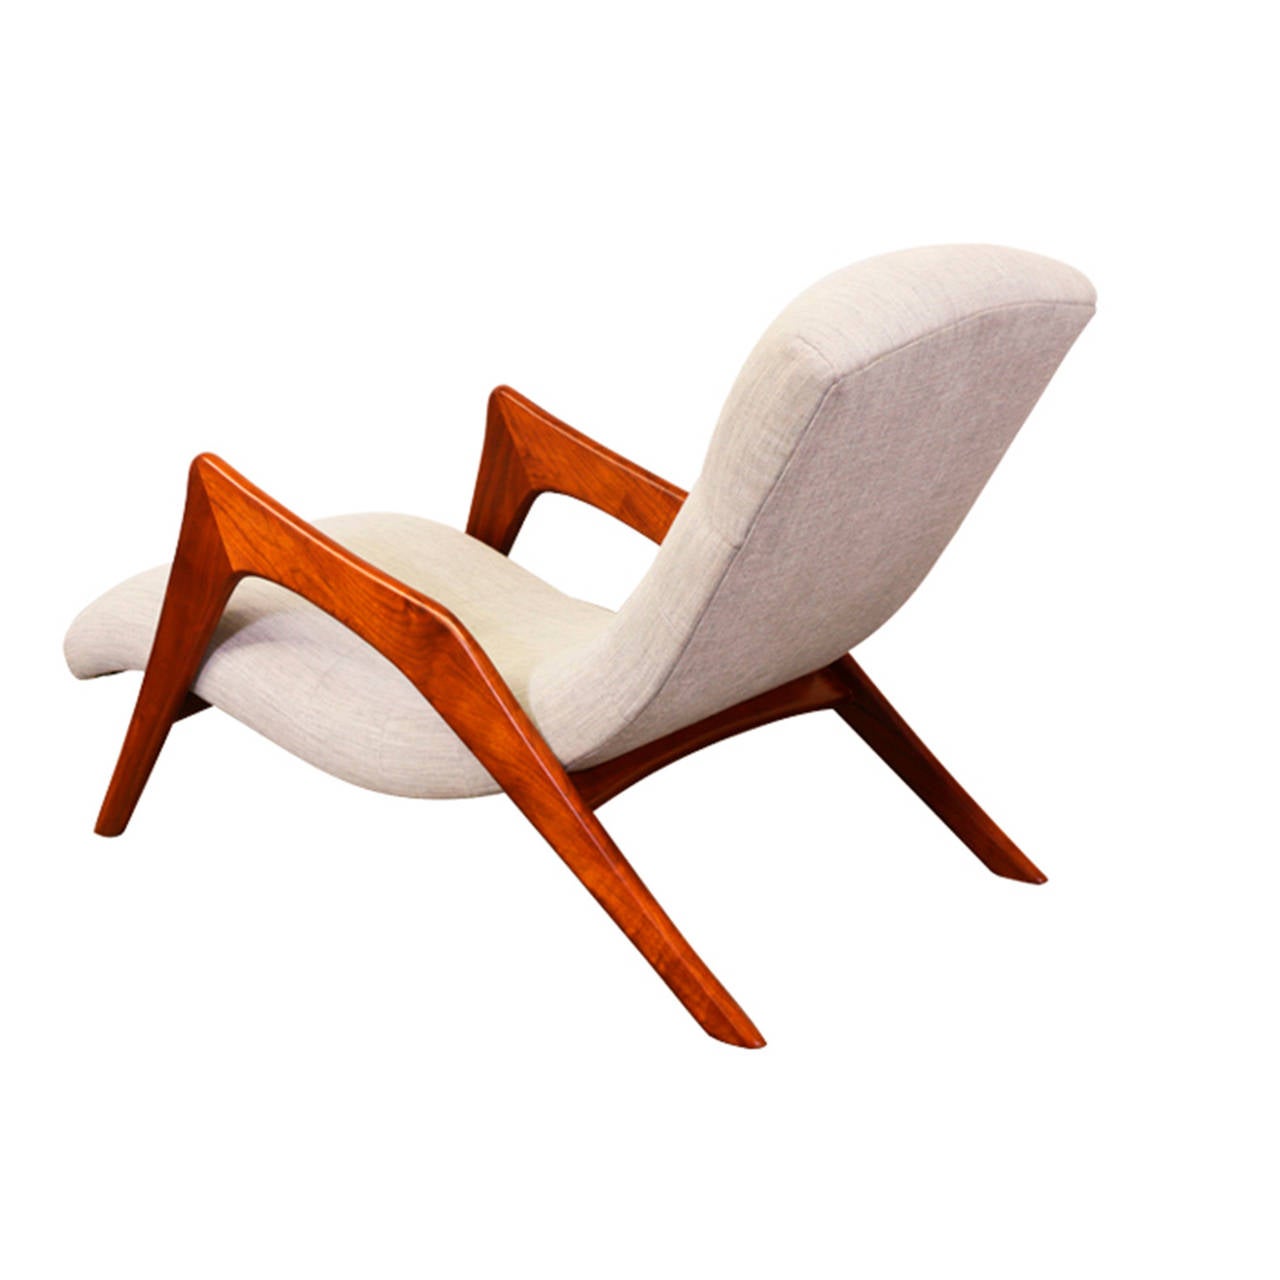 Mid-20th Century Adrian Pearsall “Grasshopper” Chaise Lounge w/ Ottoman for Craft Associates